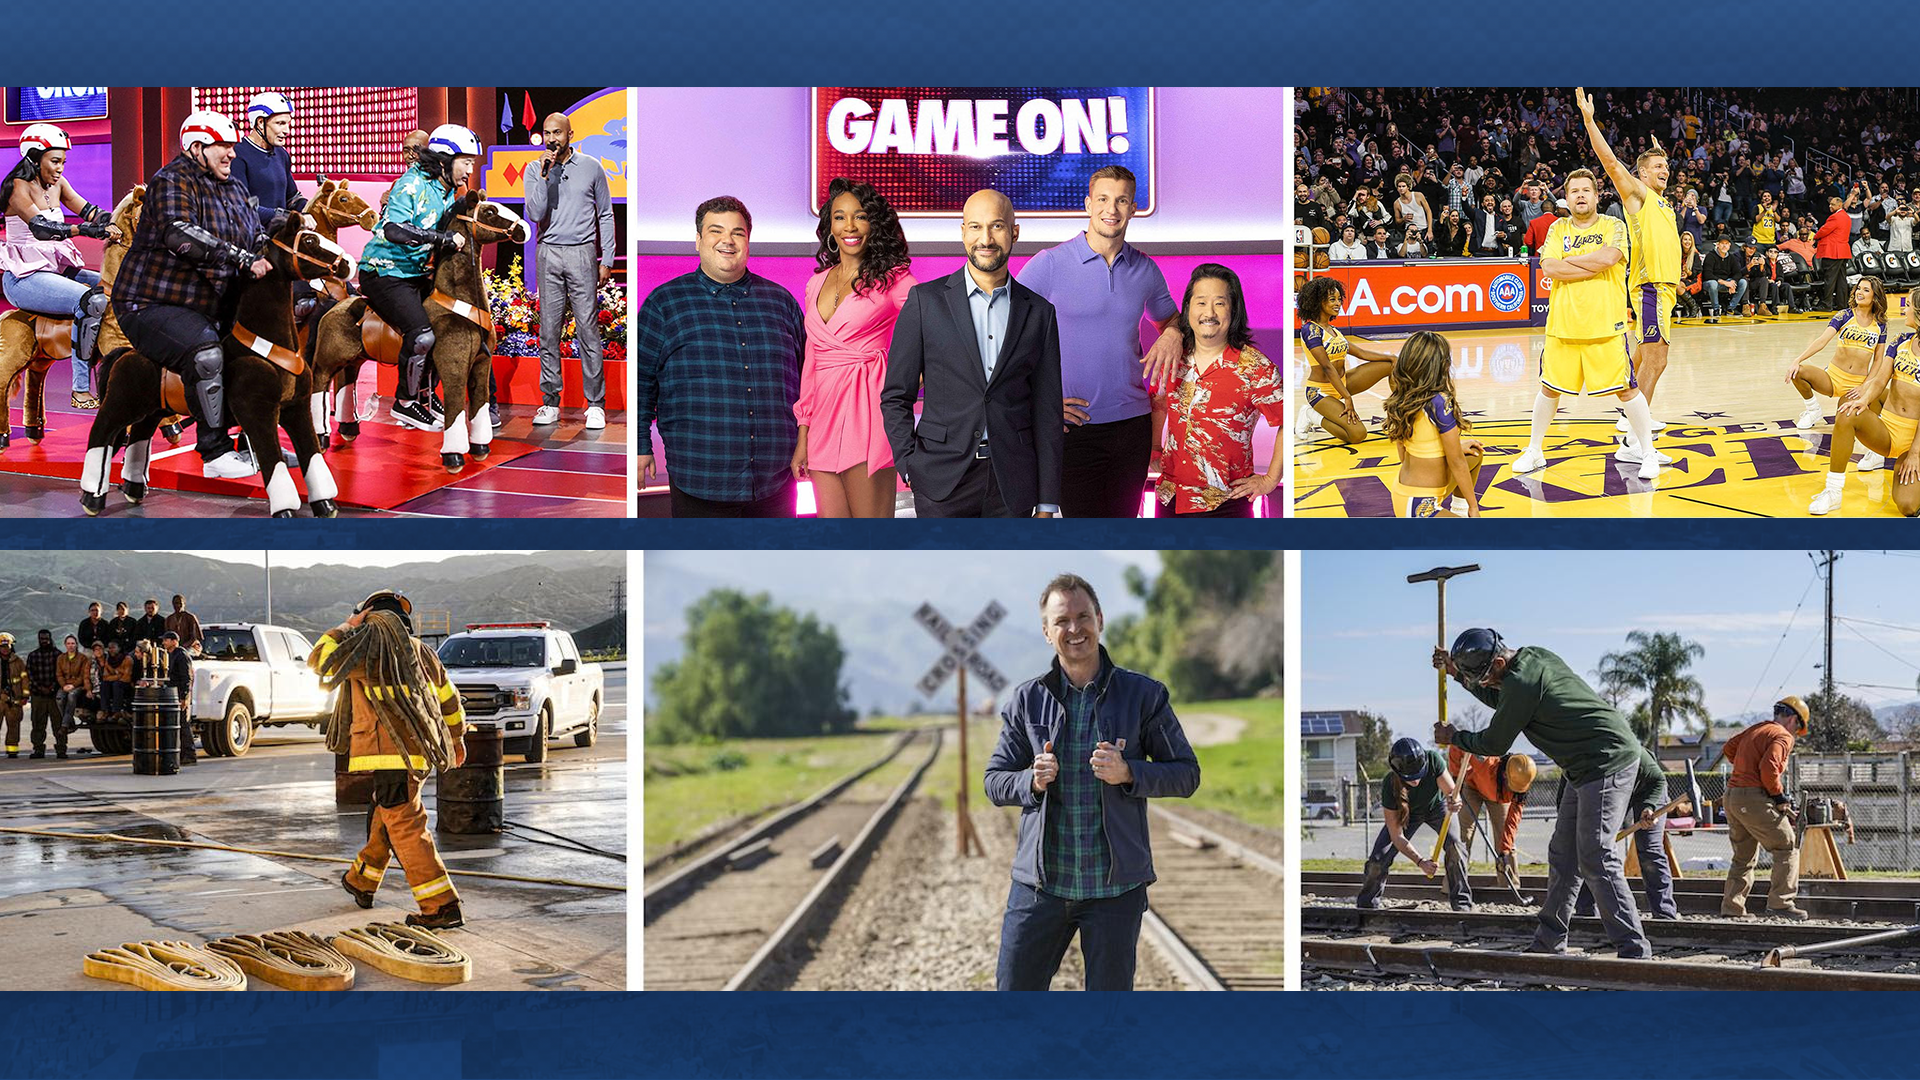 CBS announces premiere dates for two new reality series, “Game On